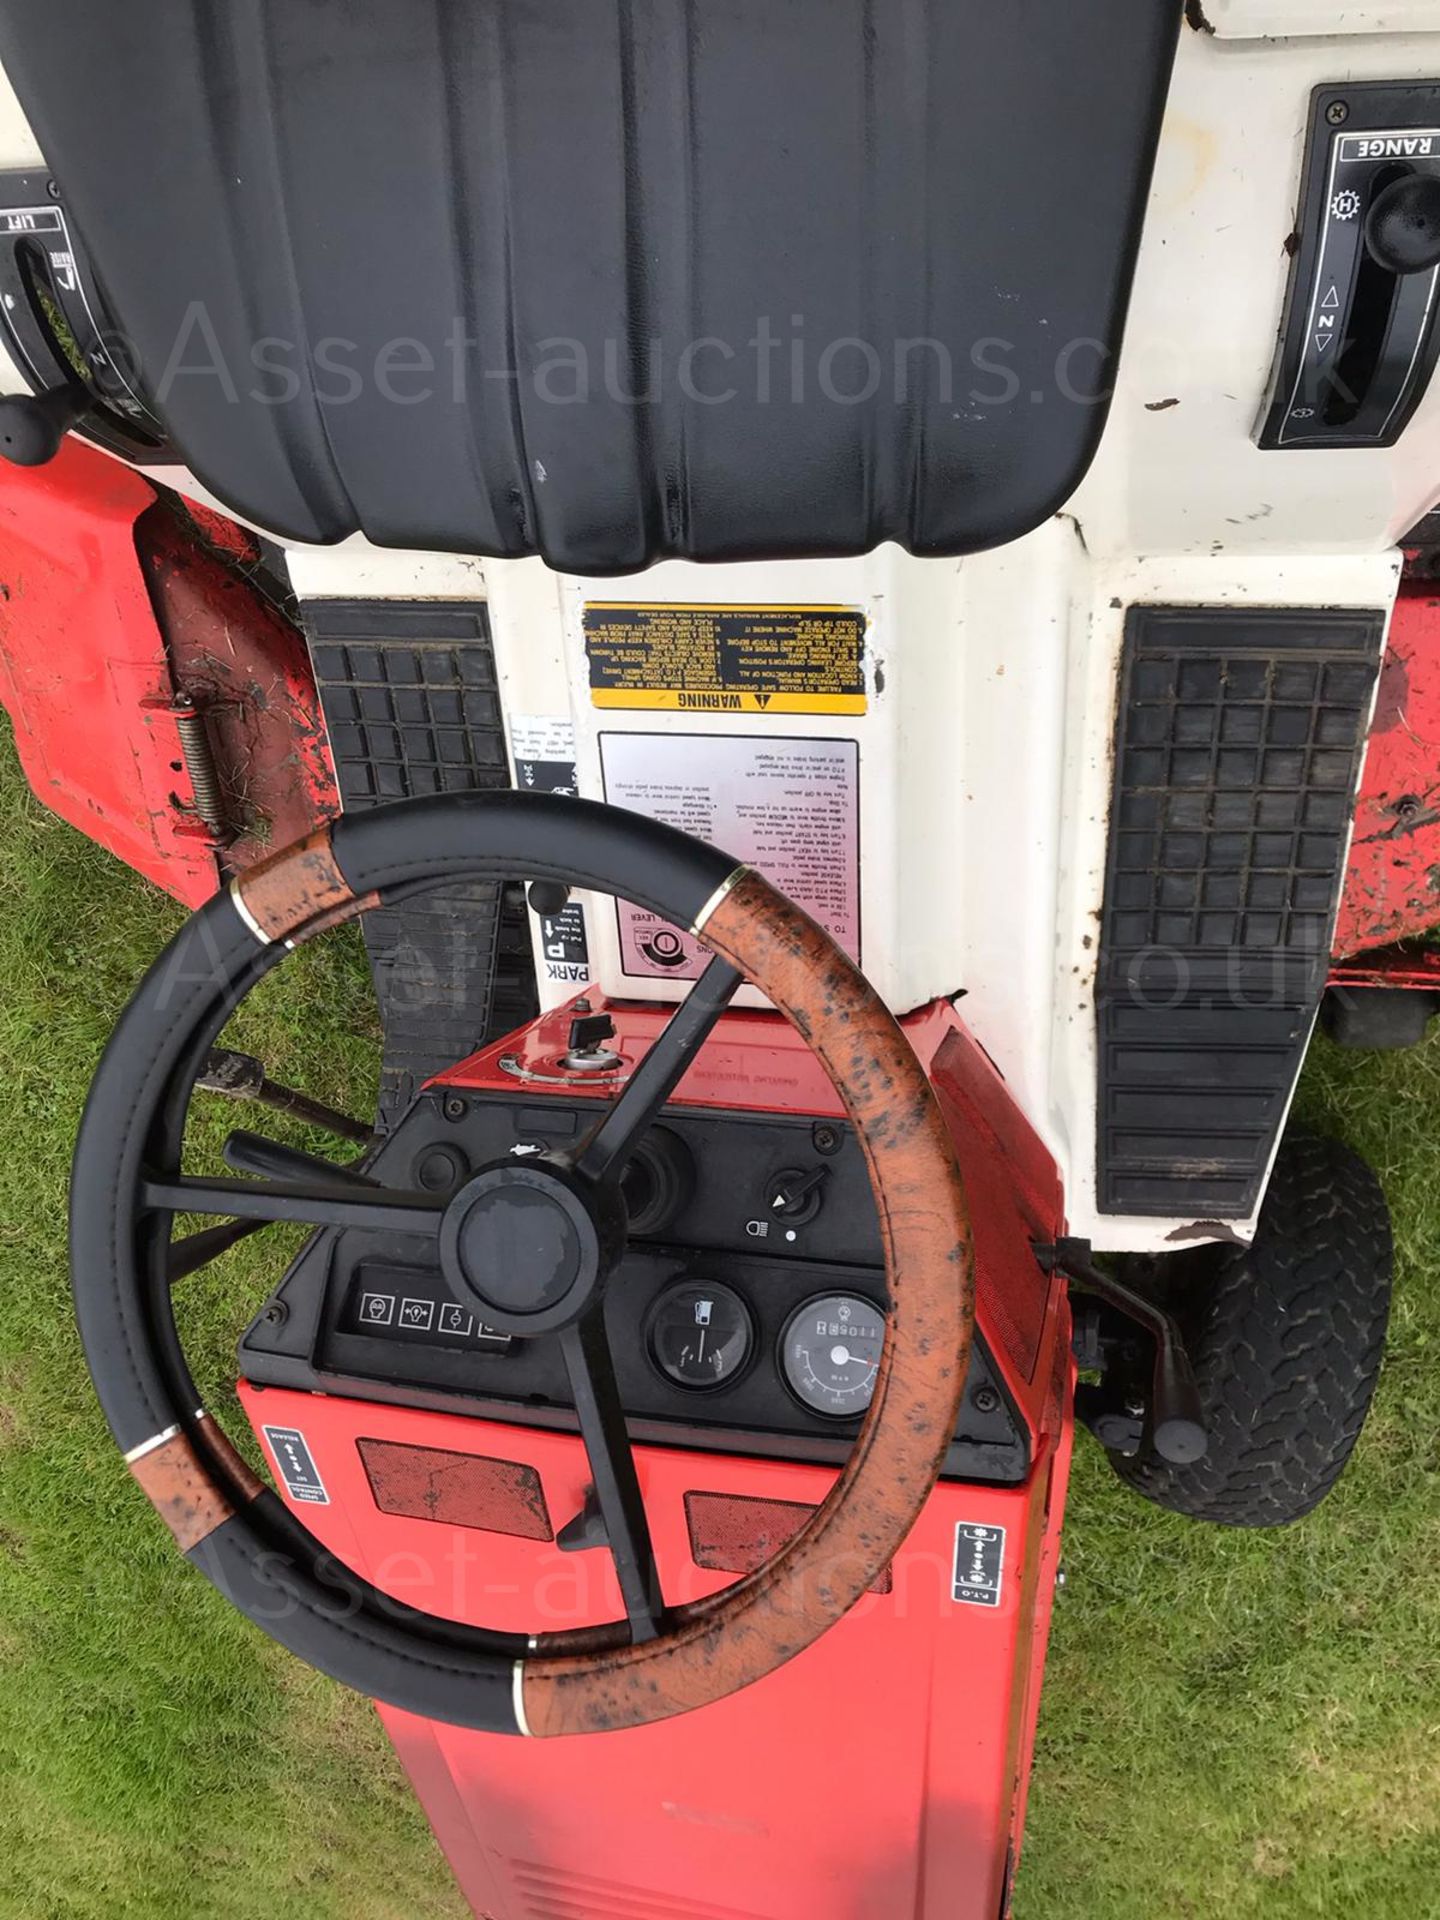 DIESEL SHIBAURA GT16 RIDE ON LAWN MOWER, RUNS, DRIVES AND CUTS, HYDROSTATIC DRIVE, *NO VAT* - Image 5 of 5